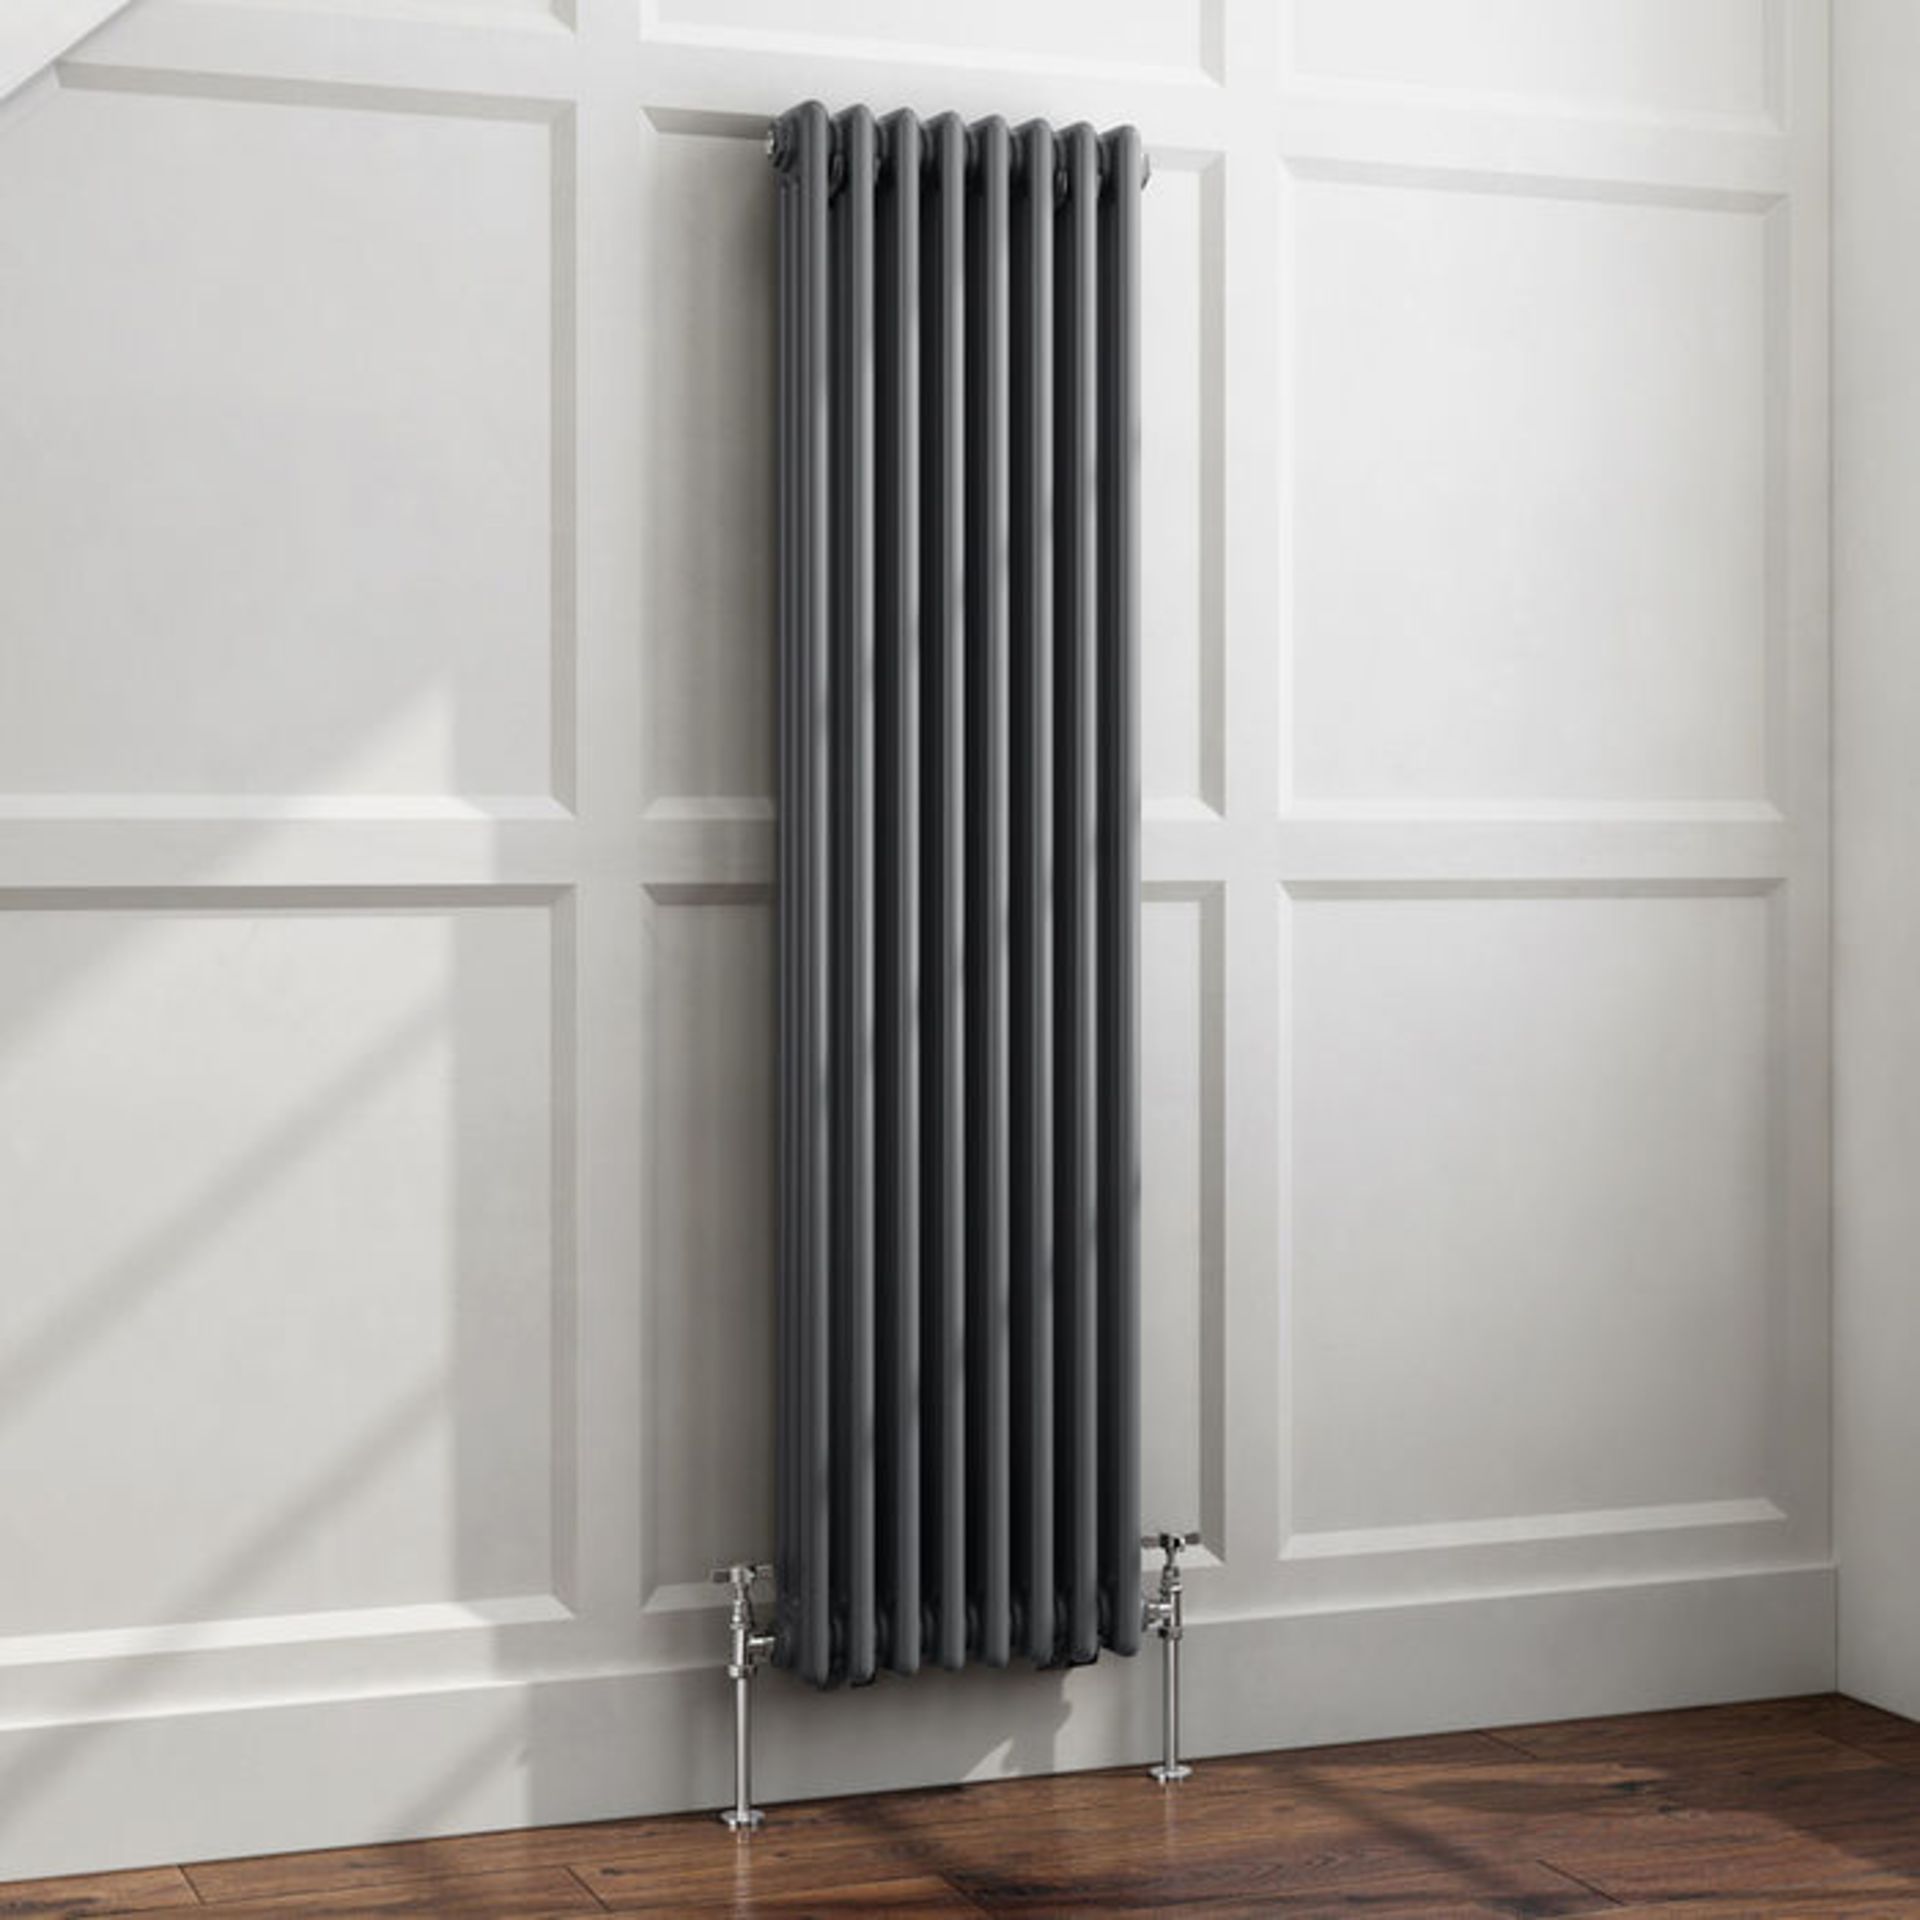 (TA181) 1500x380mm Anthracite Triple Panel Vertical Colosseum Traditional Radiator. RRP £399.99. - Image 2 of 4